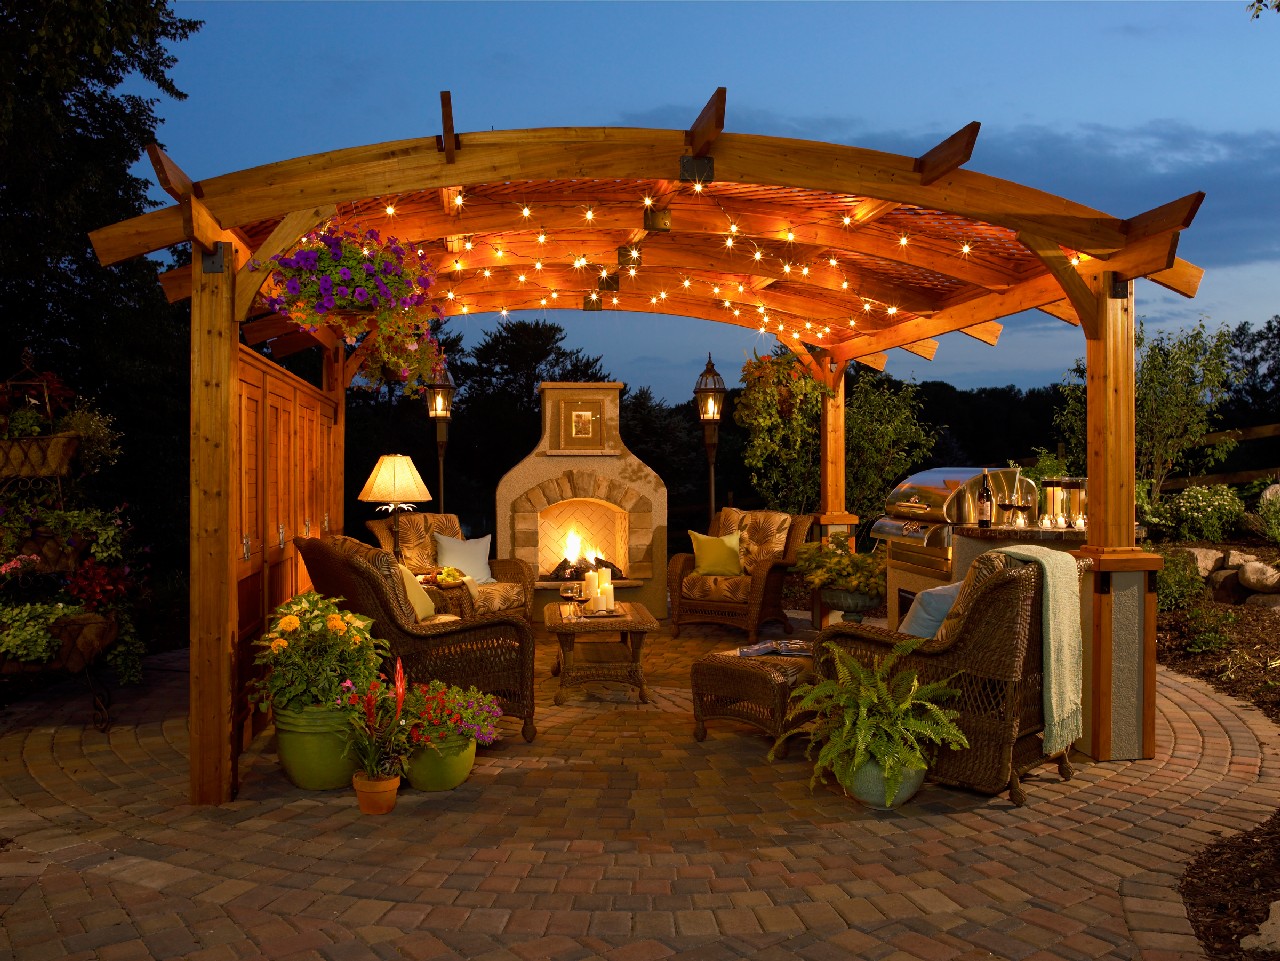 Creating a Welcoming Outdoor Ambiance for Guests